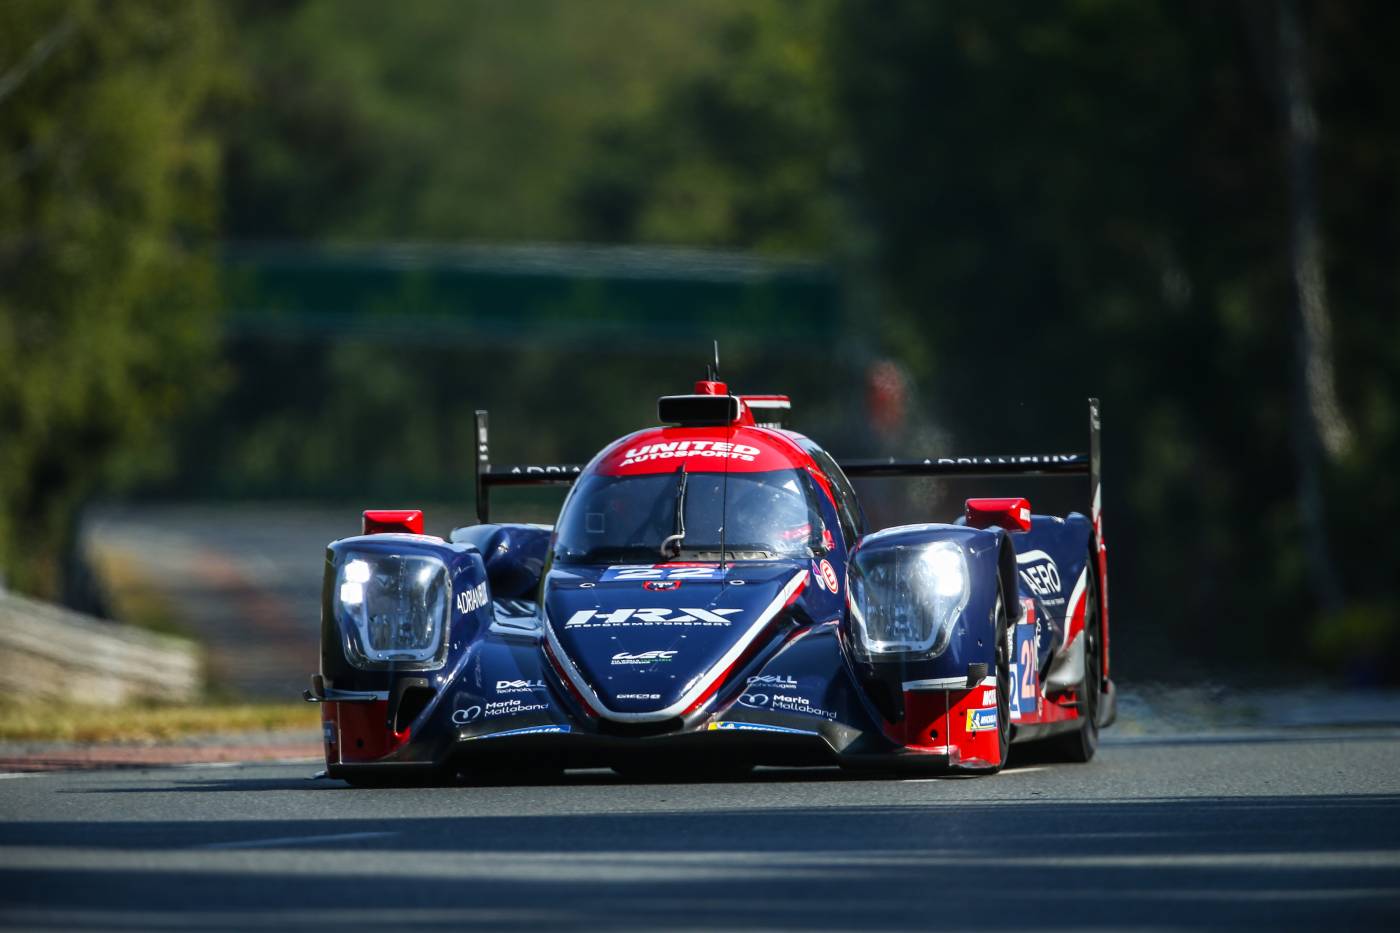 The United Autosports team’s #22 ORECA 07 pole-sitter at the first 24 Hours of Le Mans Hyperpole